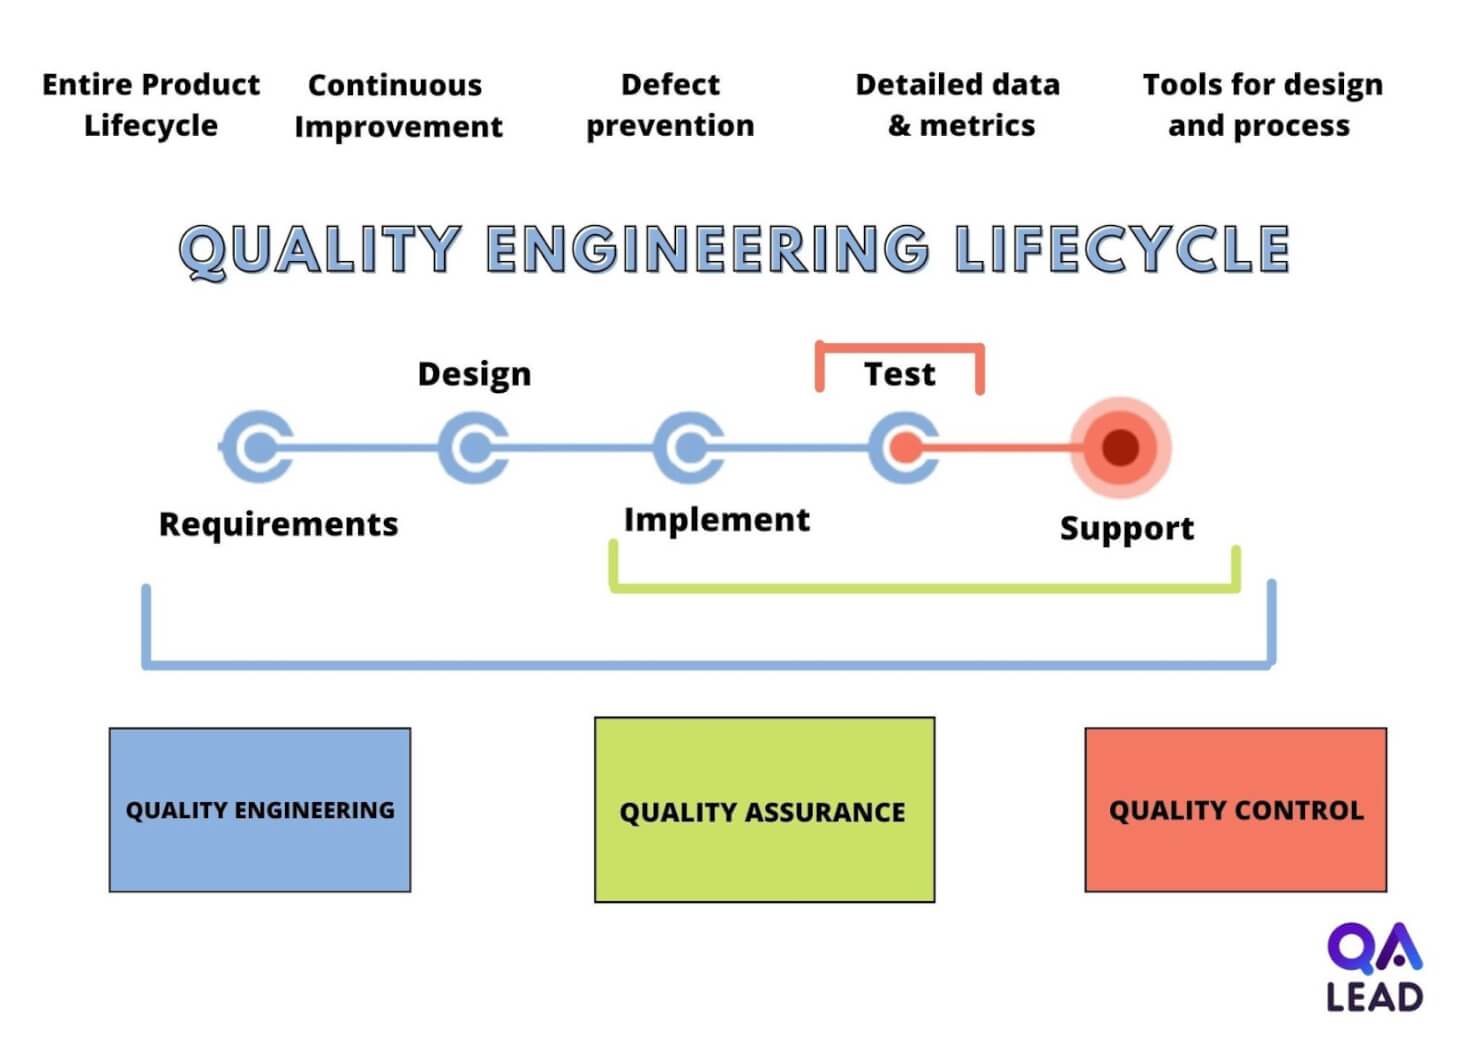 Quality engineering lifecycle